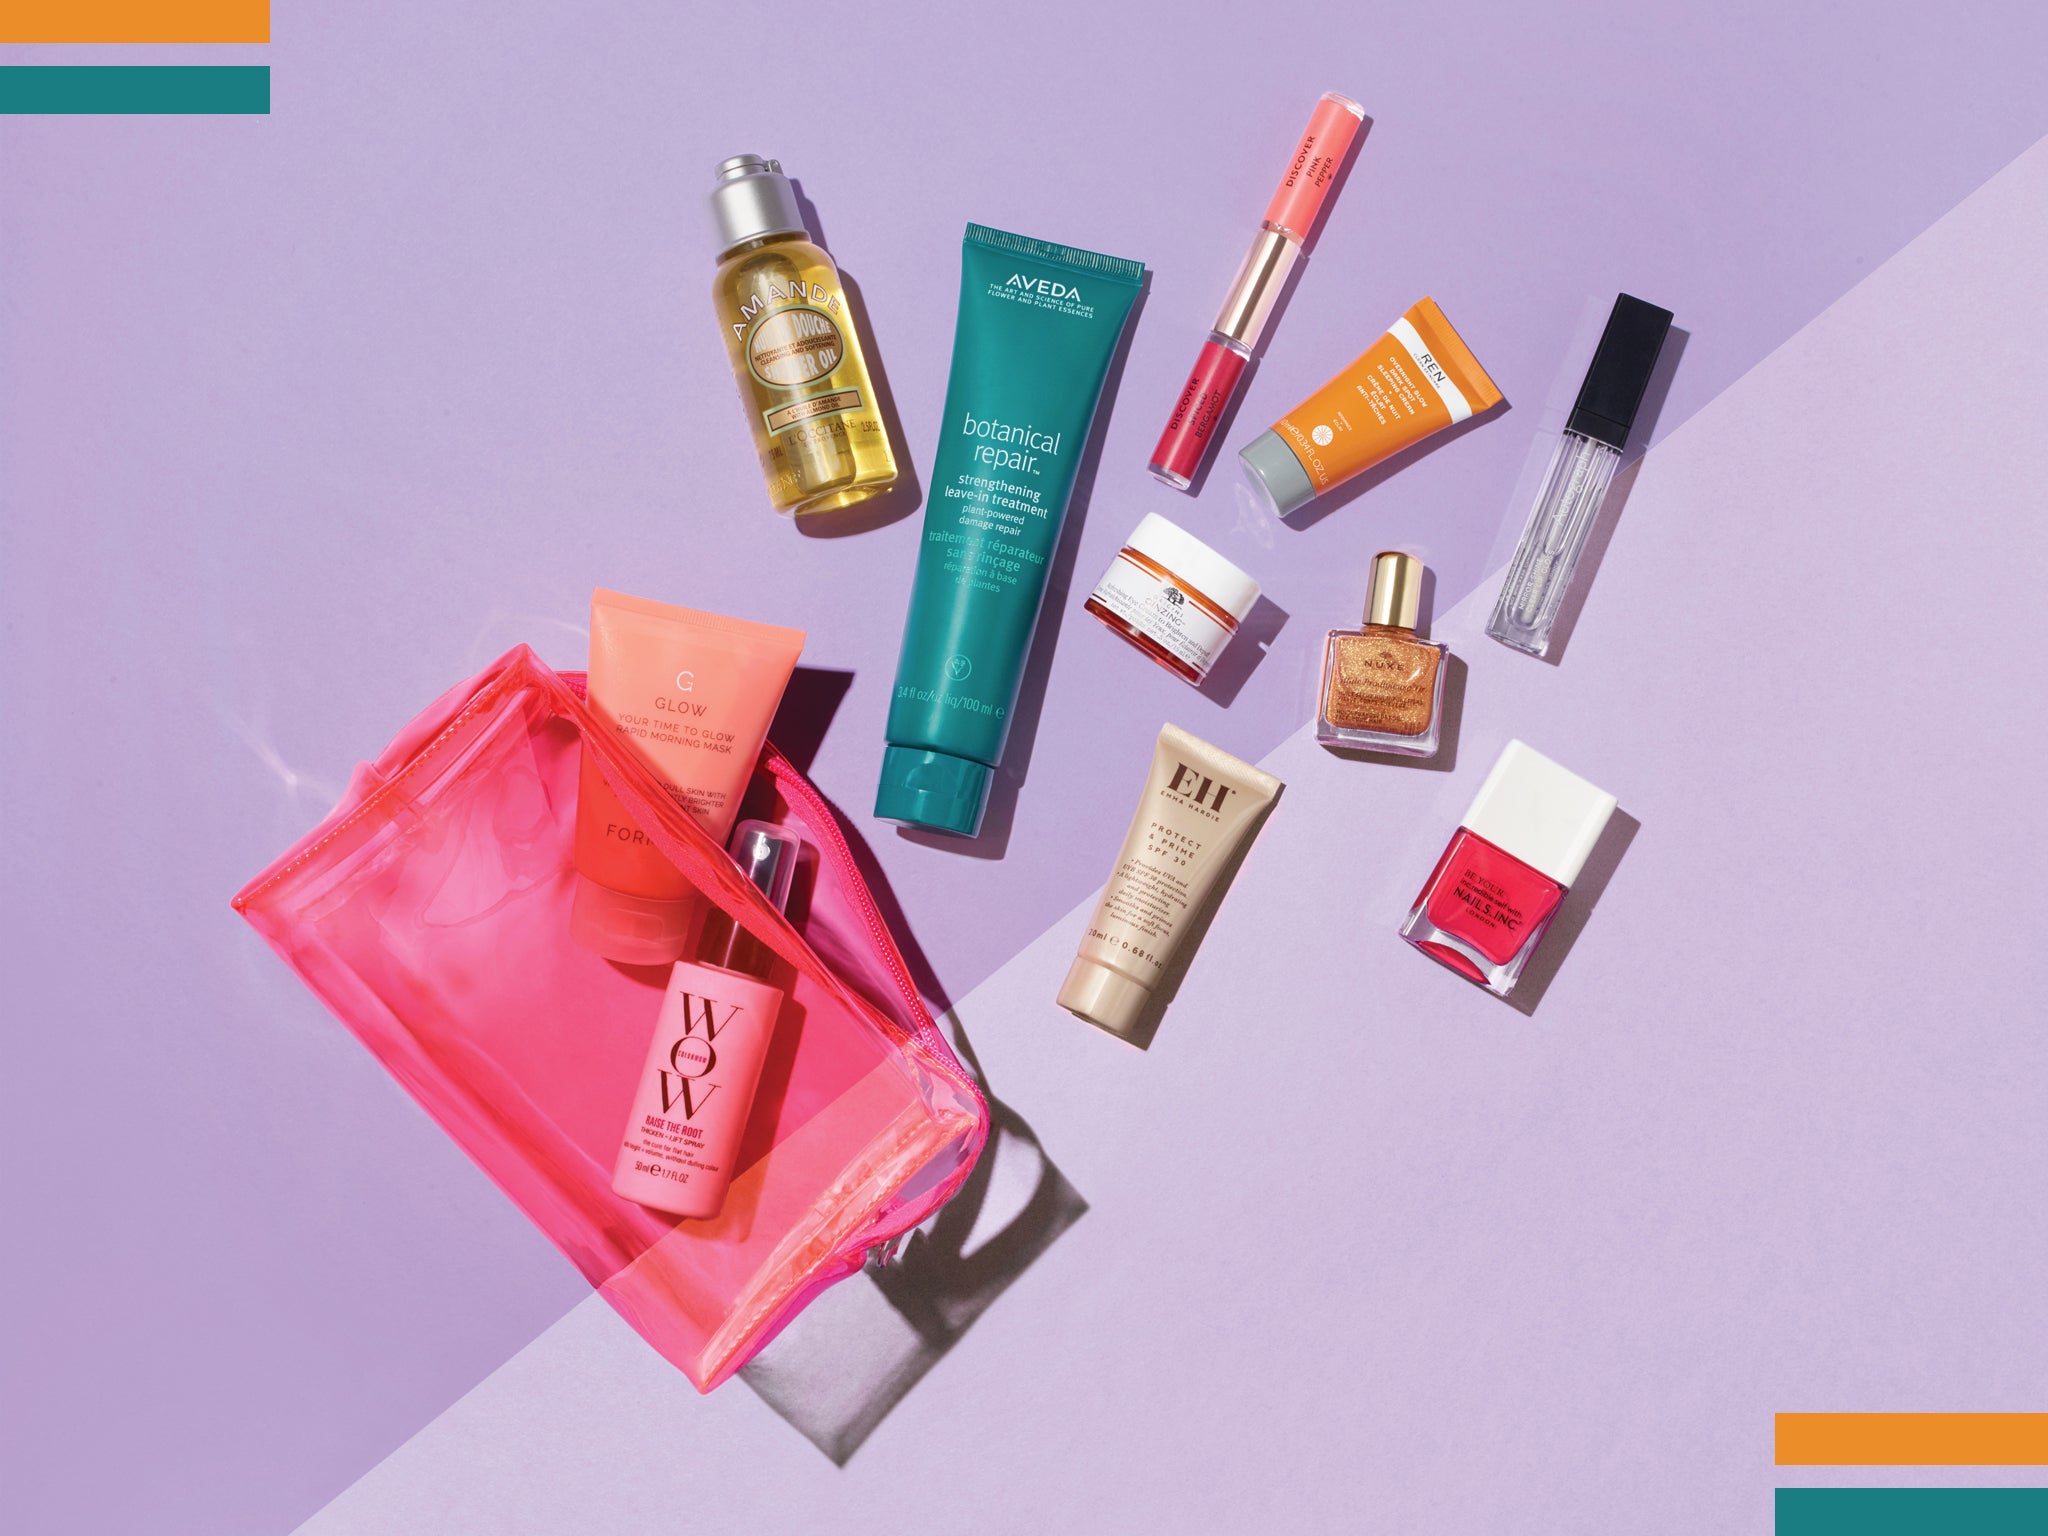 The bag is full of cult beauty products for your skin, hair, body and nails